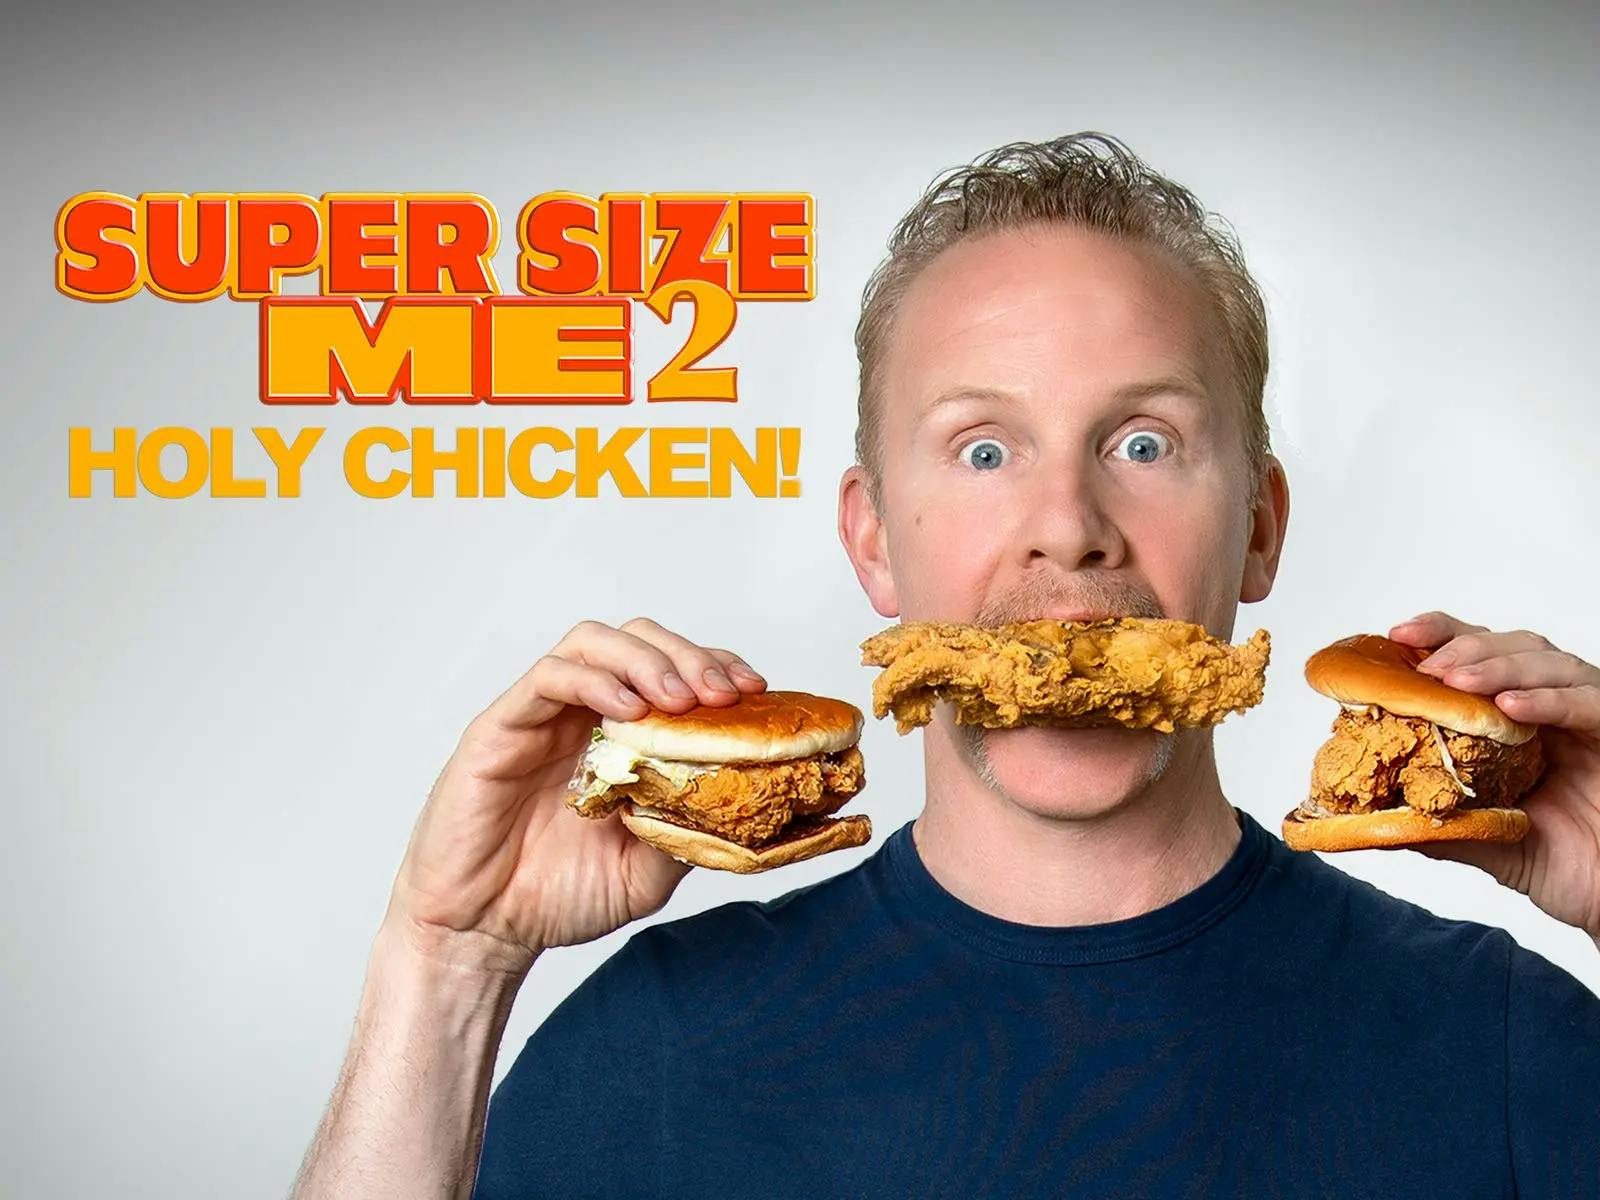 Super Size Me 2 Holy Chicken!